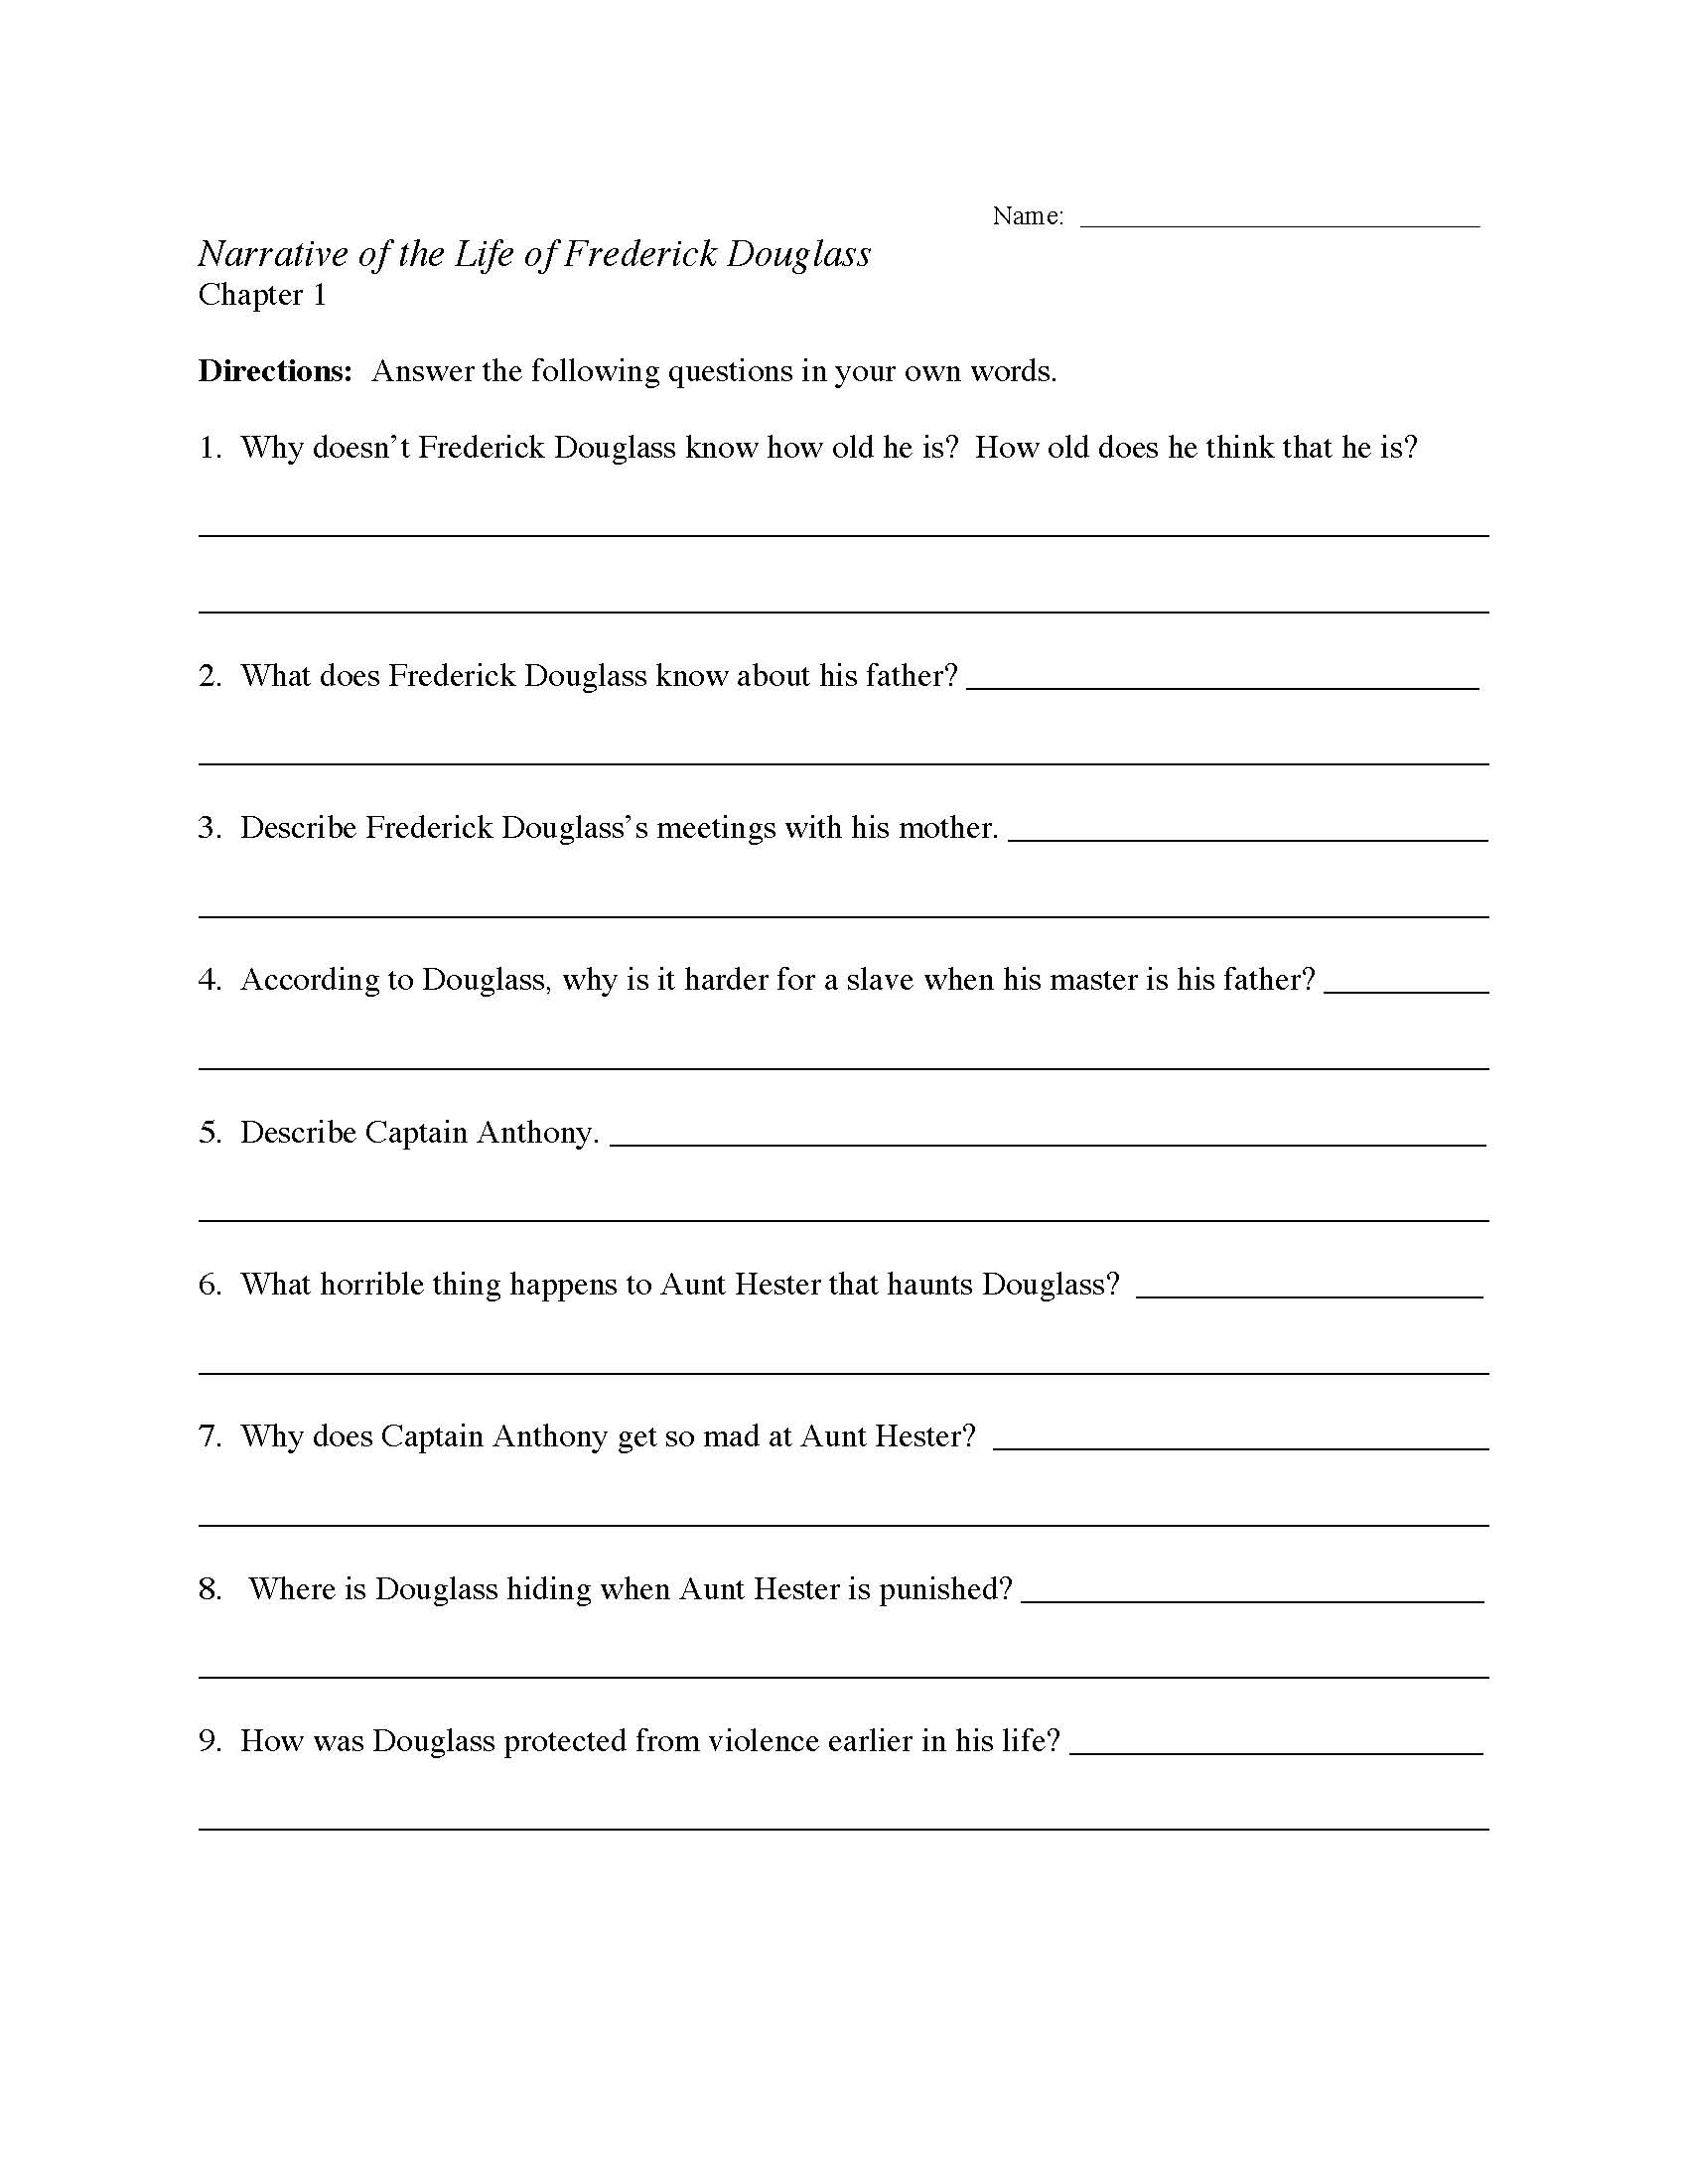 This is a preview image of the Narrative of the Life of Frederick Douglass Chapter One Worksheet.